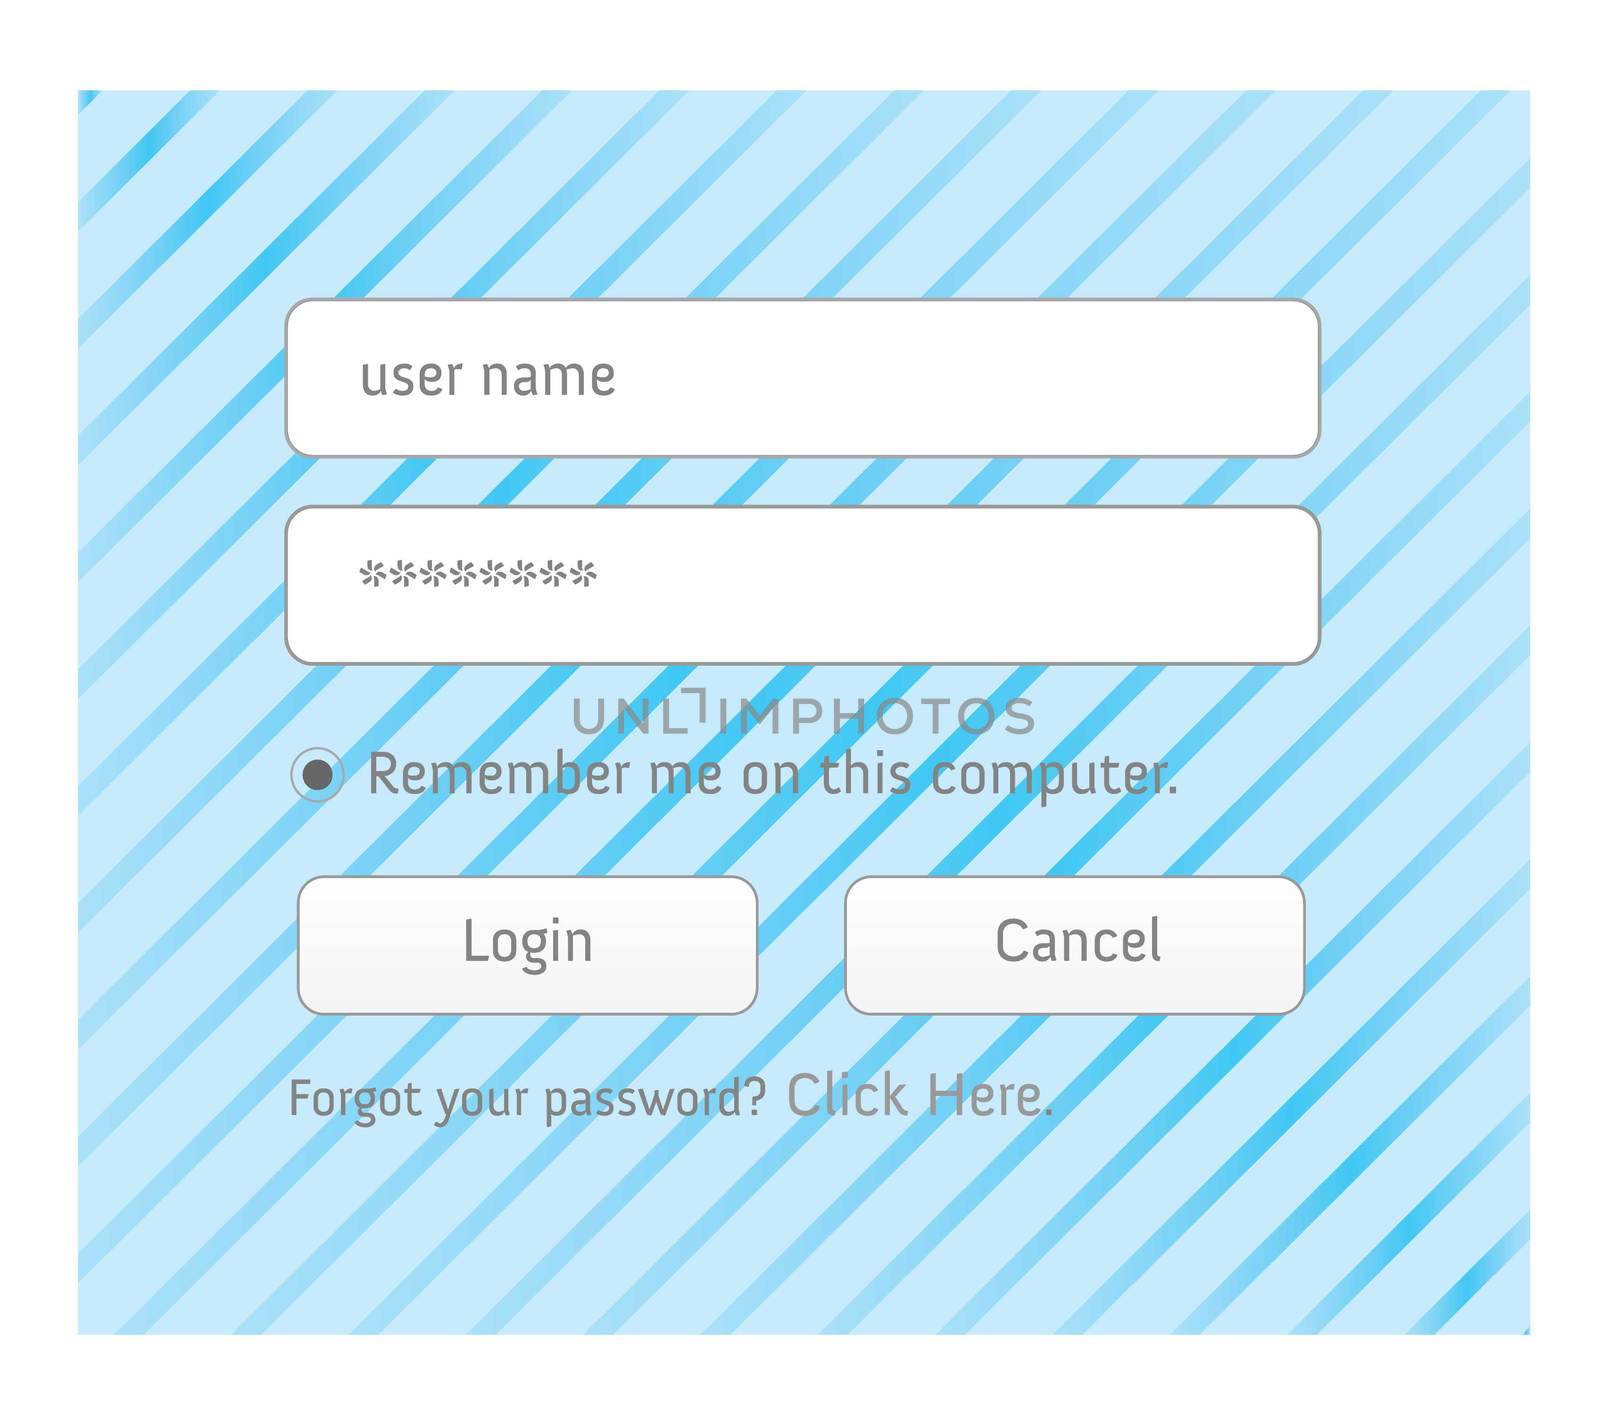 An illustrated login interface - username and password